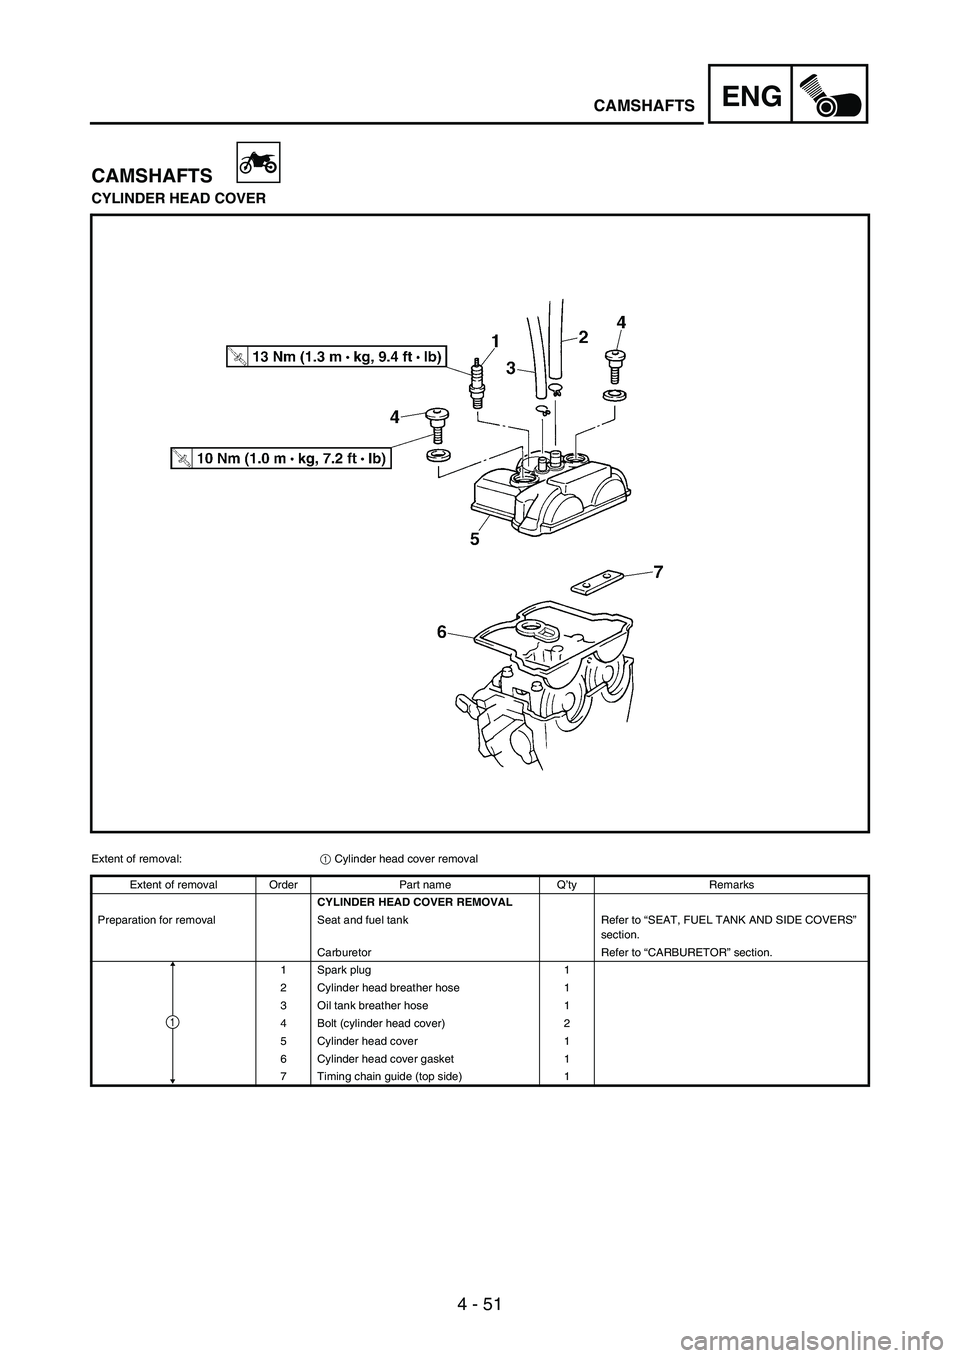 YAMAHA WR 250F 2004  Manuale de Empleo (in Spanish) 4 - 51
ENGCAMSHAFTS
CAMSHAFTS
CYLINDER HEAD COVER
Extent of removal:
1 Cylinder head cover removal
Extent of removal Order Part name Q’ty Remarks
CYLINDER HEAD COVER REMOVAL
Preparation for removal 